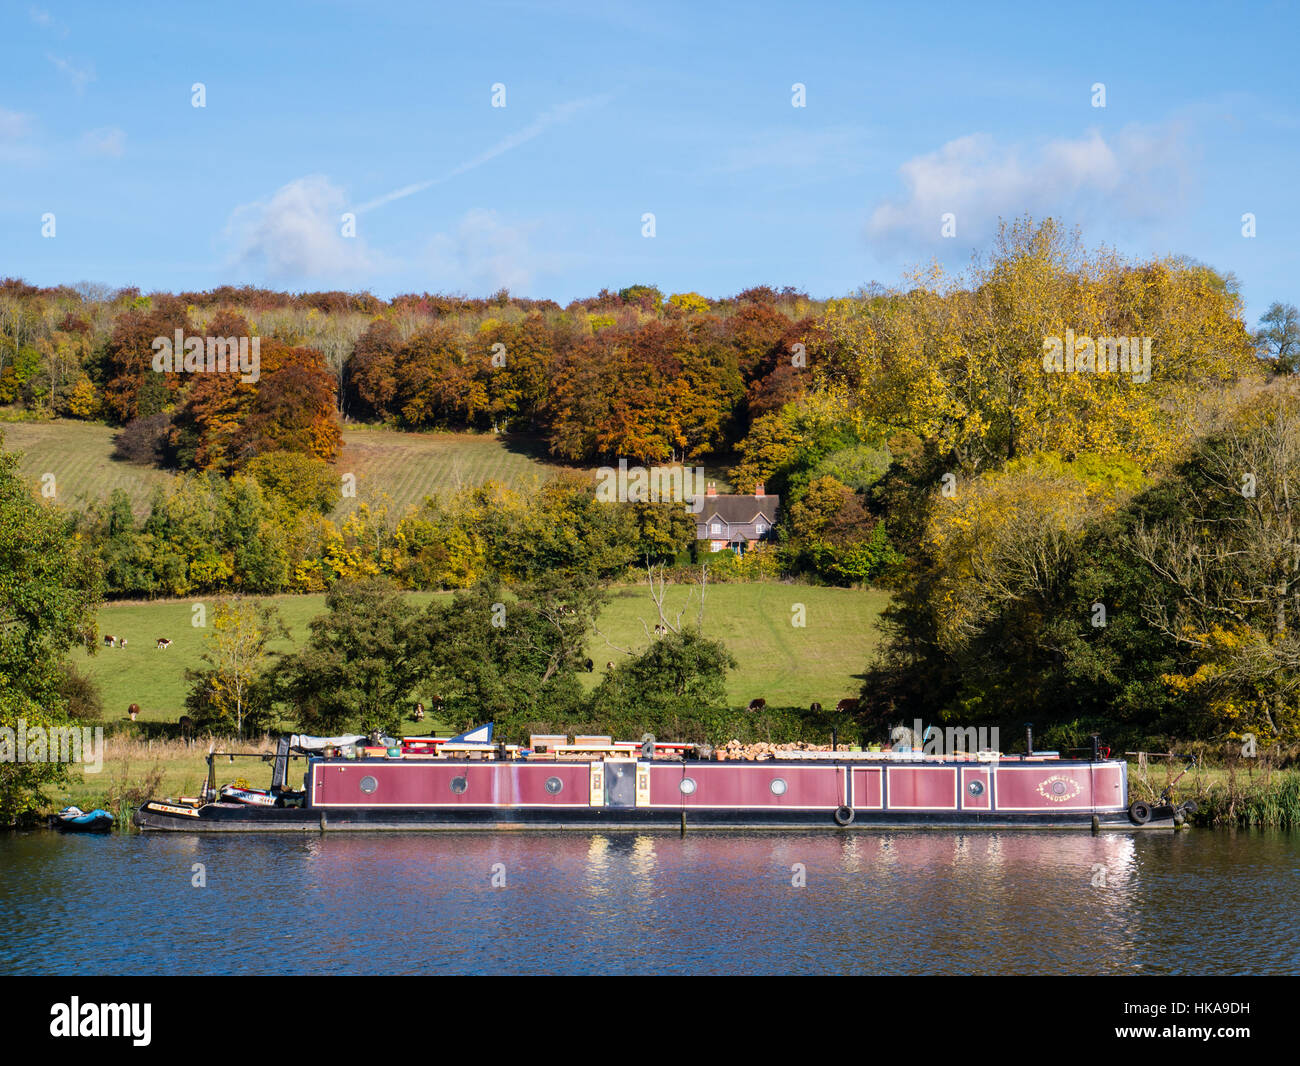 Red Narrow Boat, River Thames, nr Purley on Thames, Reading, Berkshire, England, UK, GB. Stock Photo